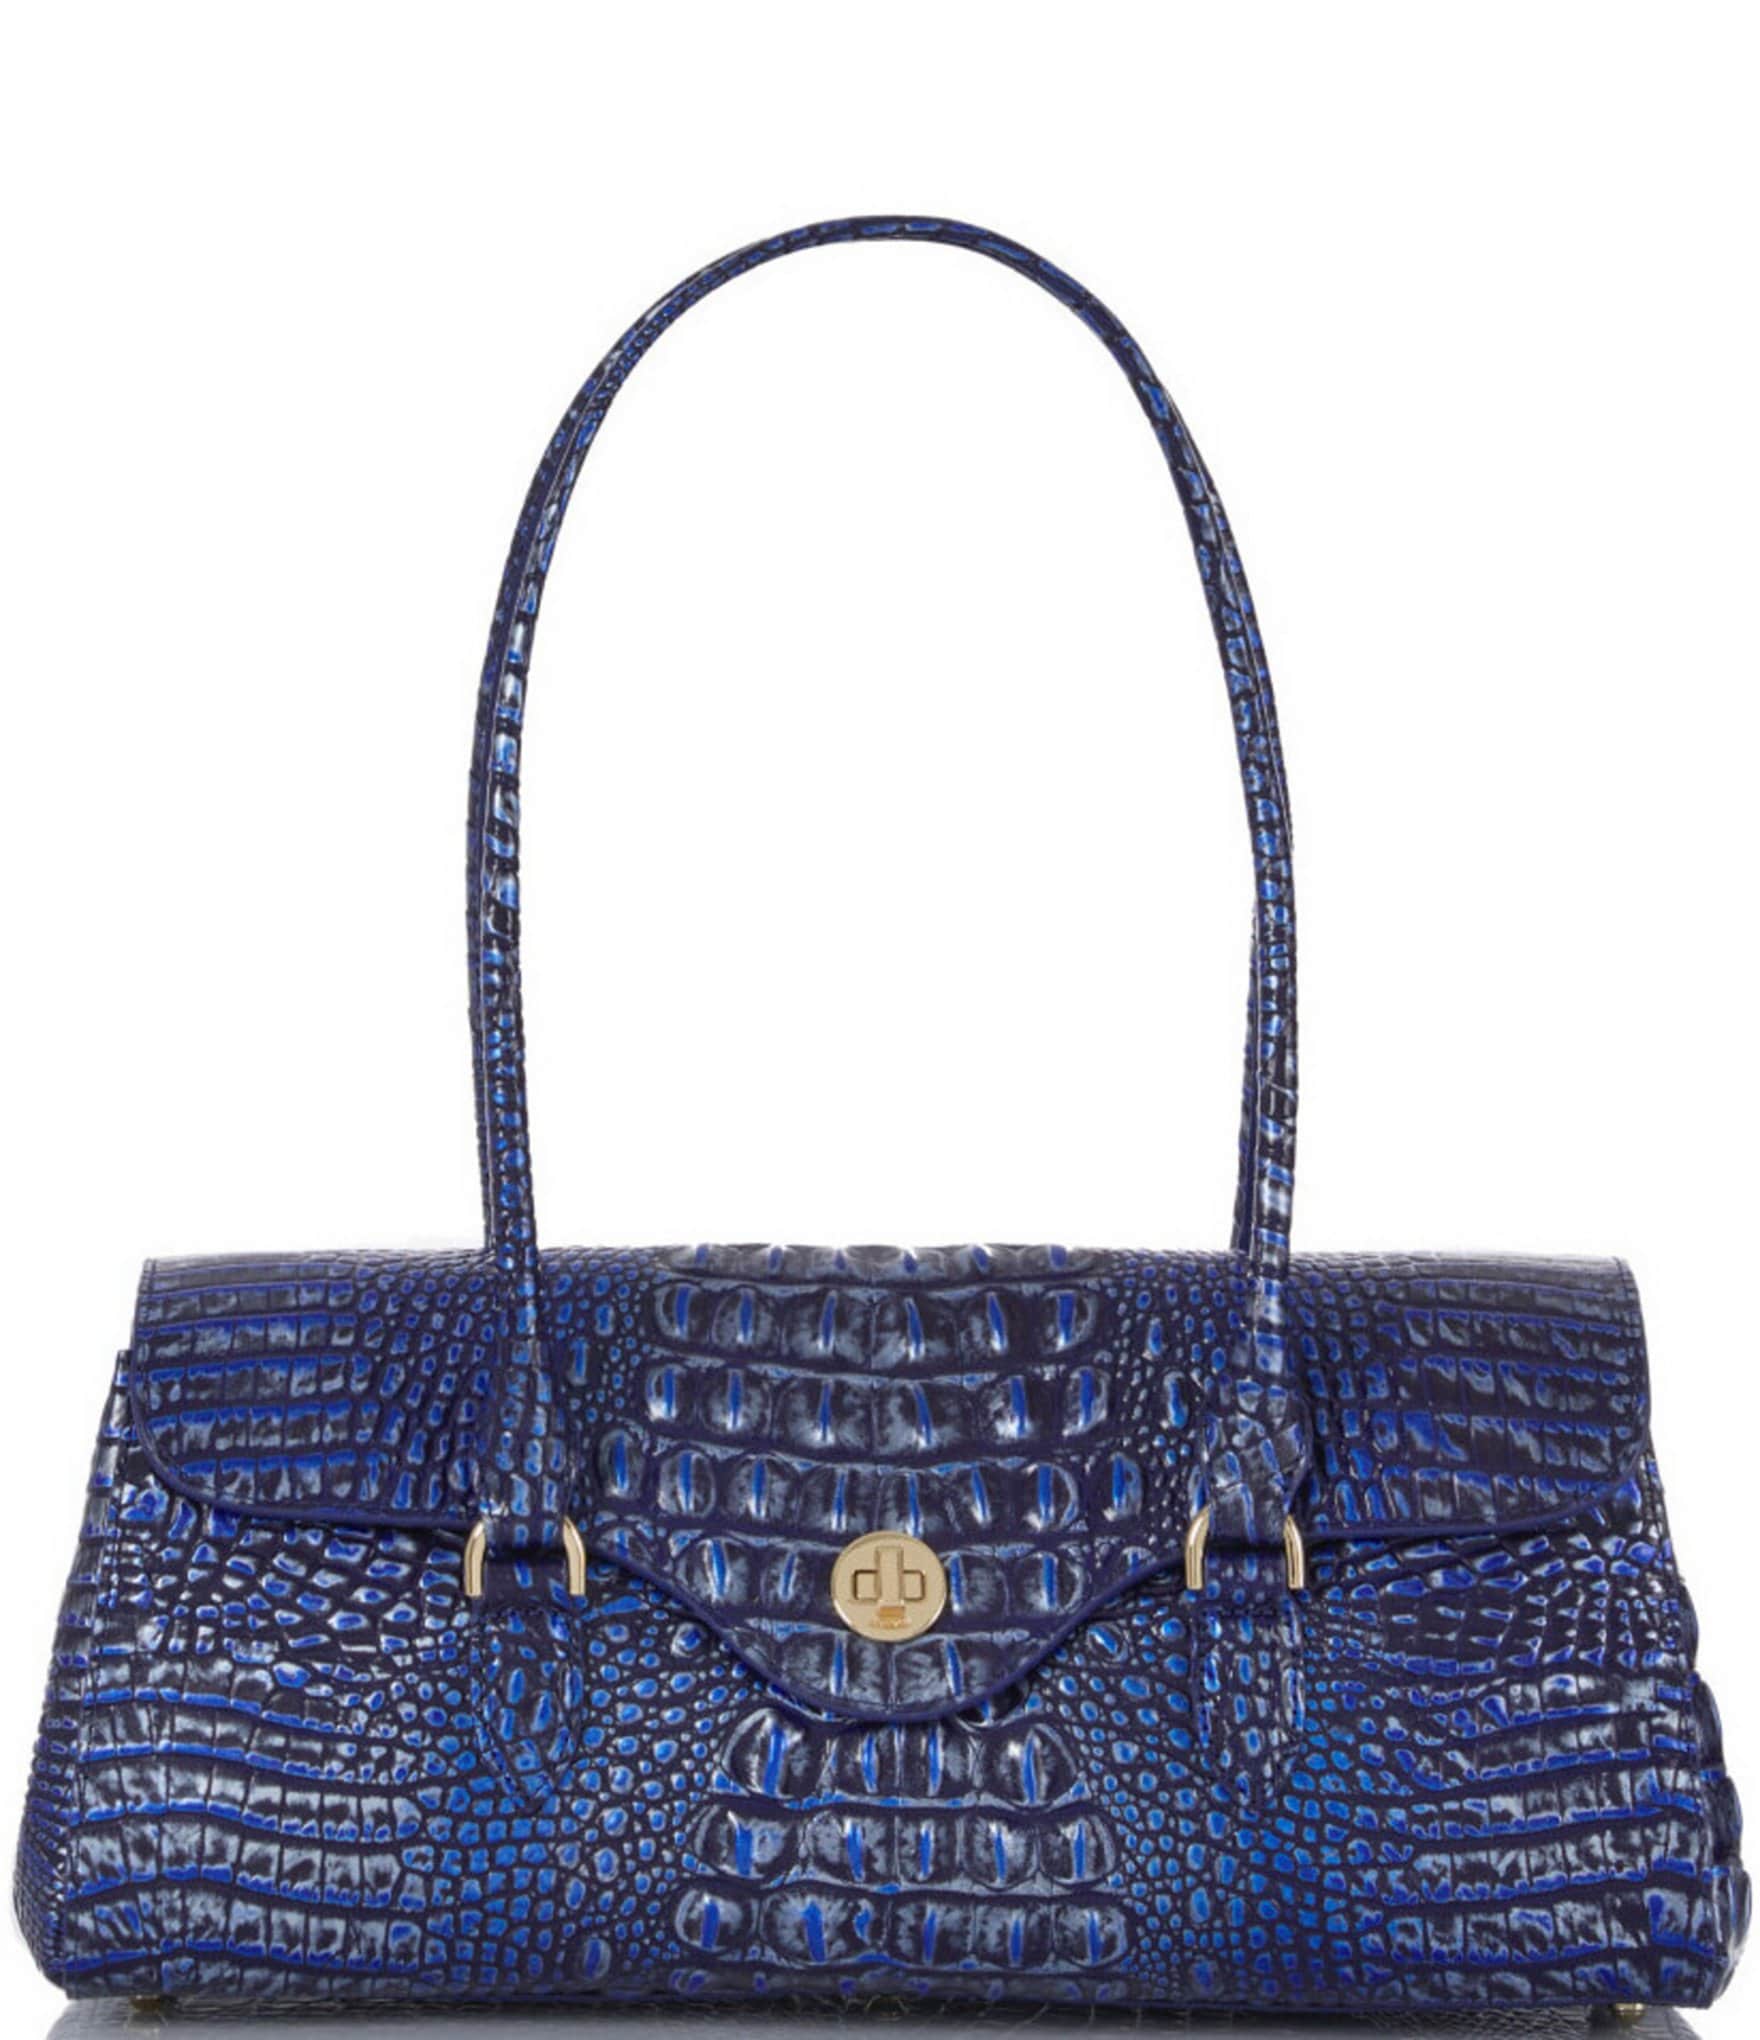 Tiffany & Fred Snake-embossed Leather Satchel in Metallic